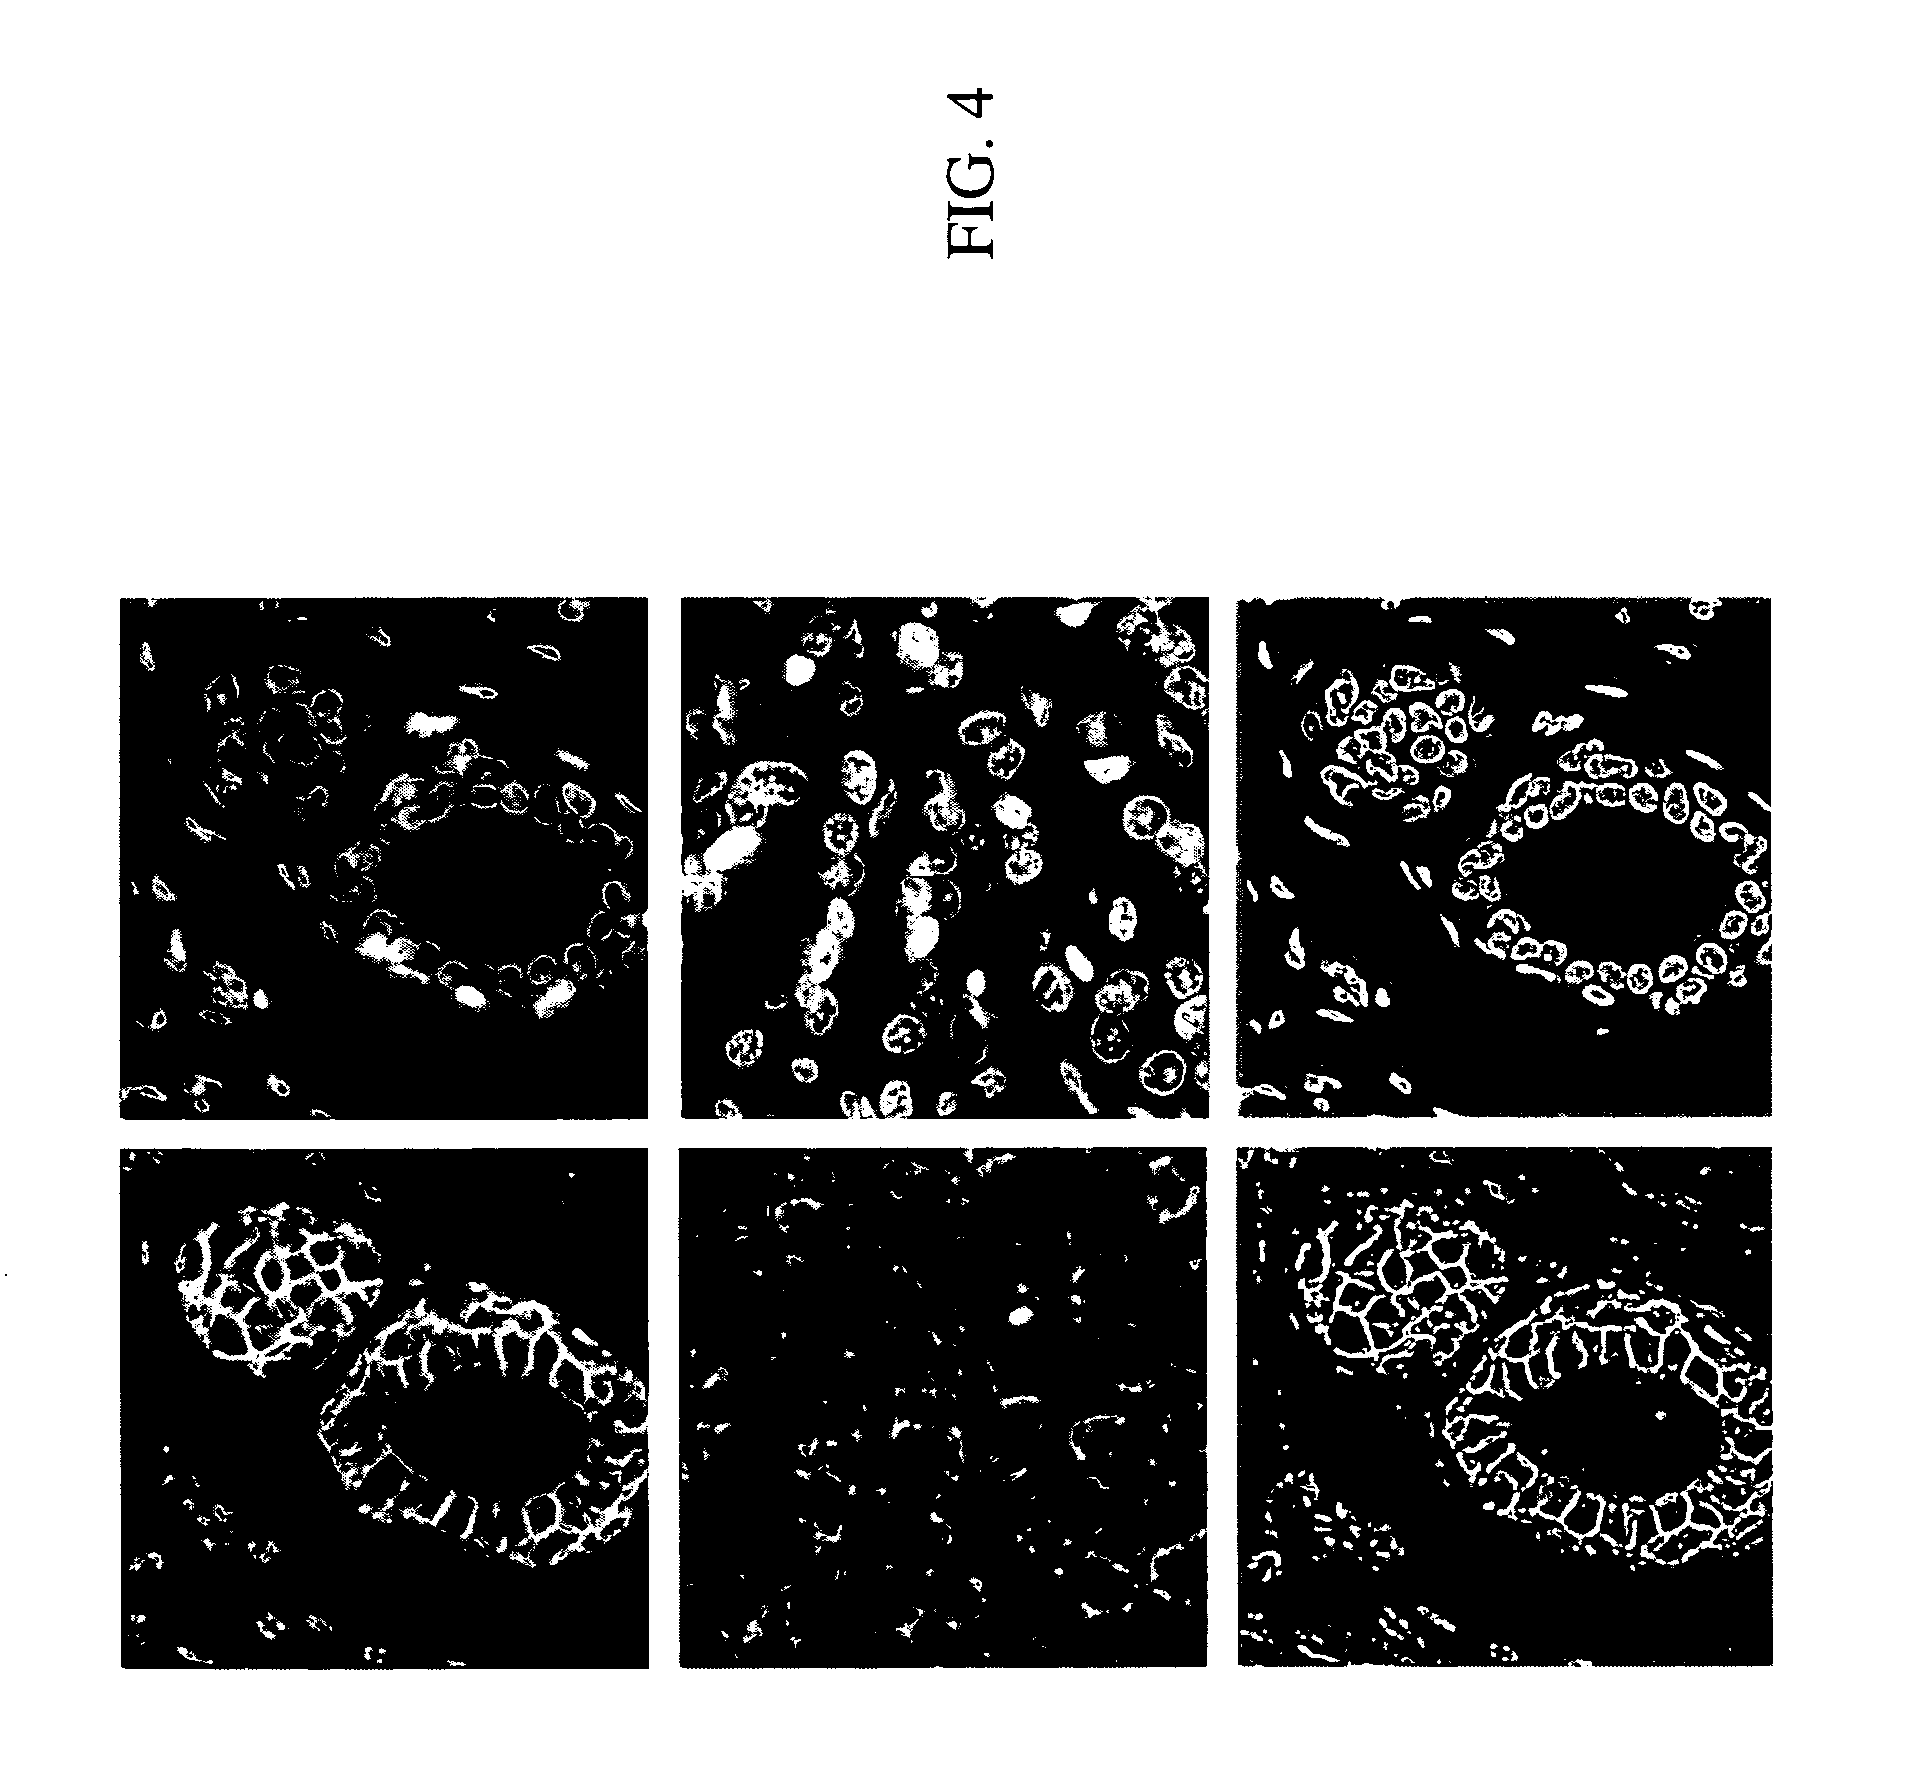 System and methods for scoring images of a tissue micro array